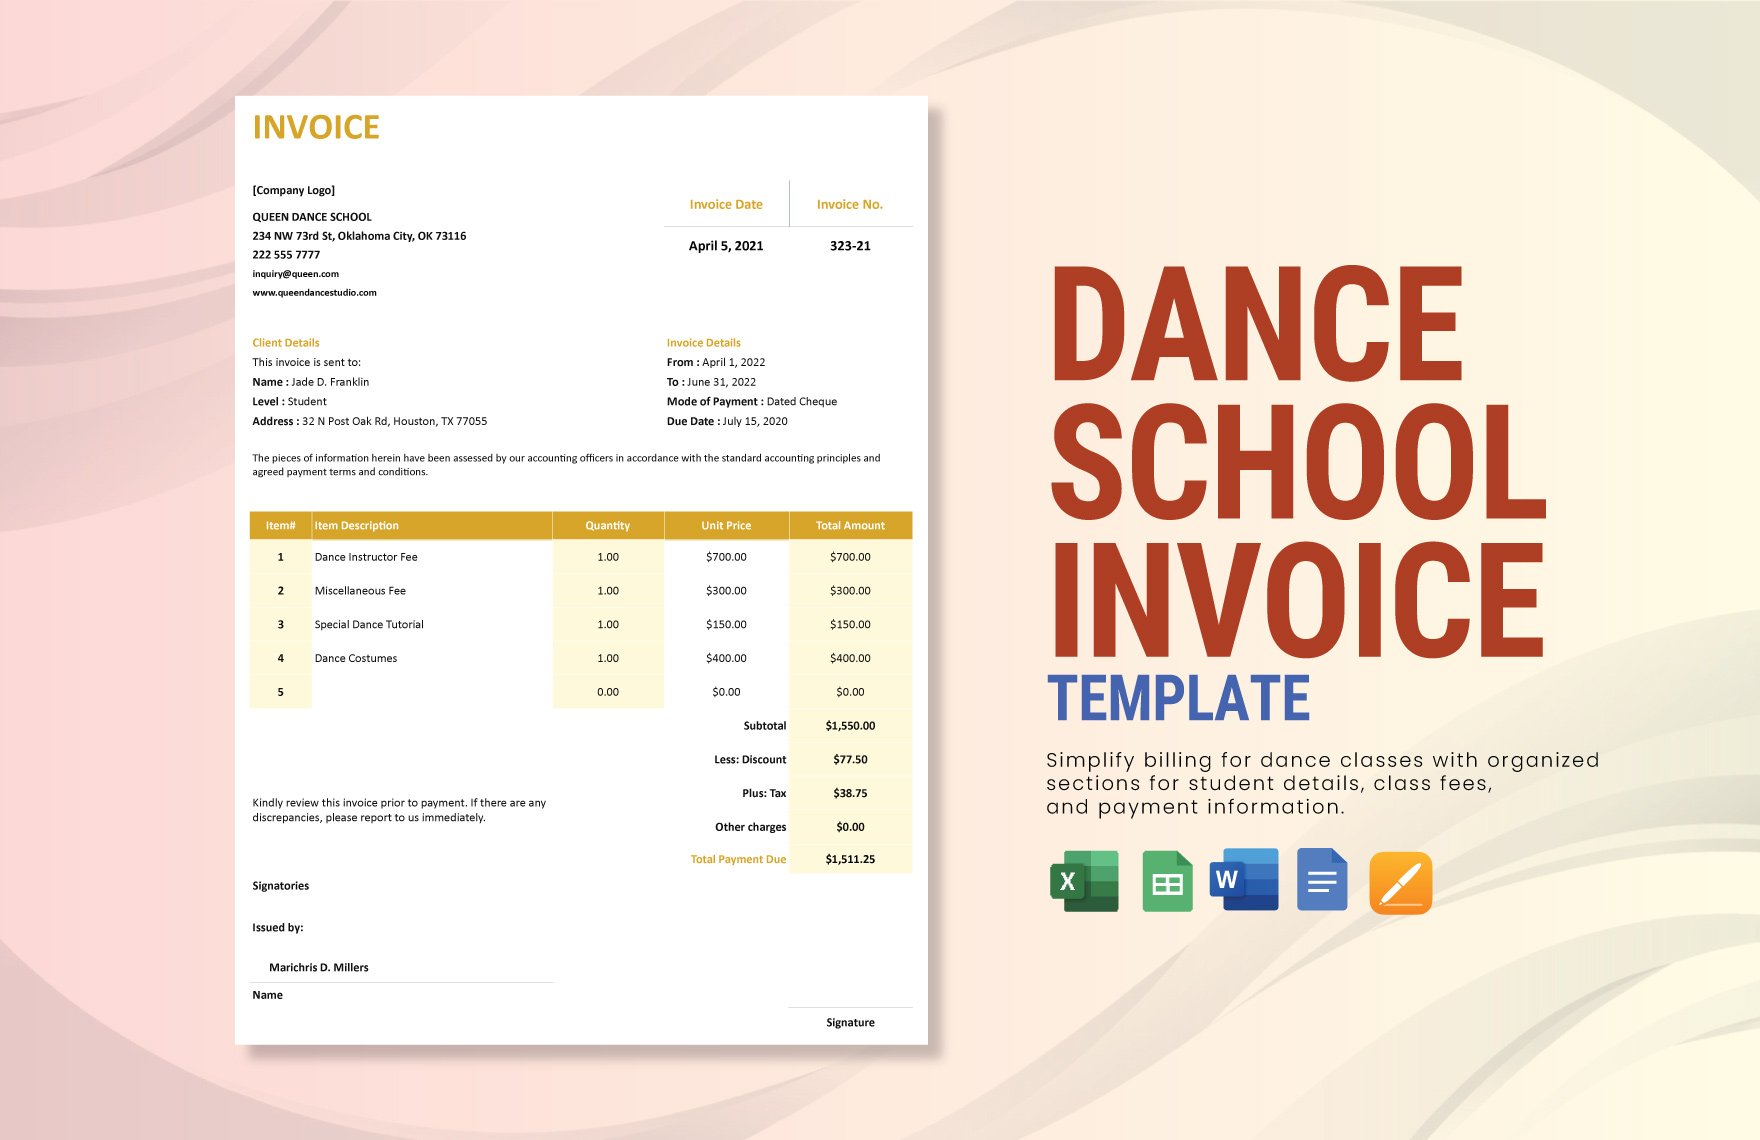 Dance School Invoice Template in Word, Google Docs, Excel, Google Sheets, Apple Pages